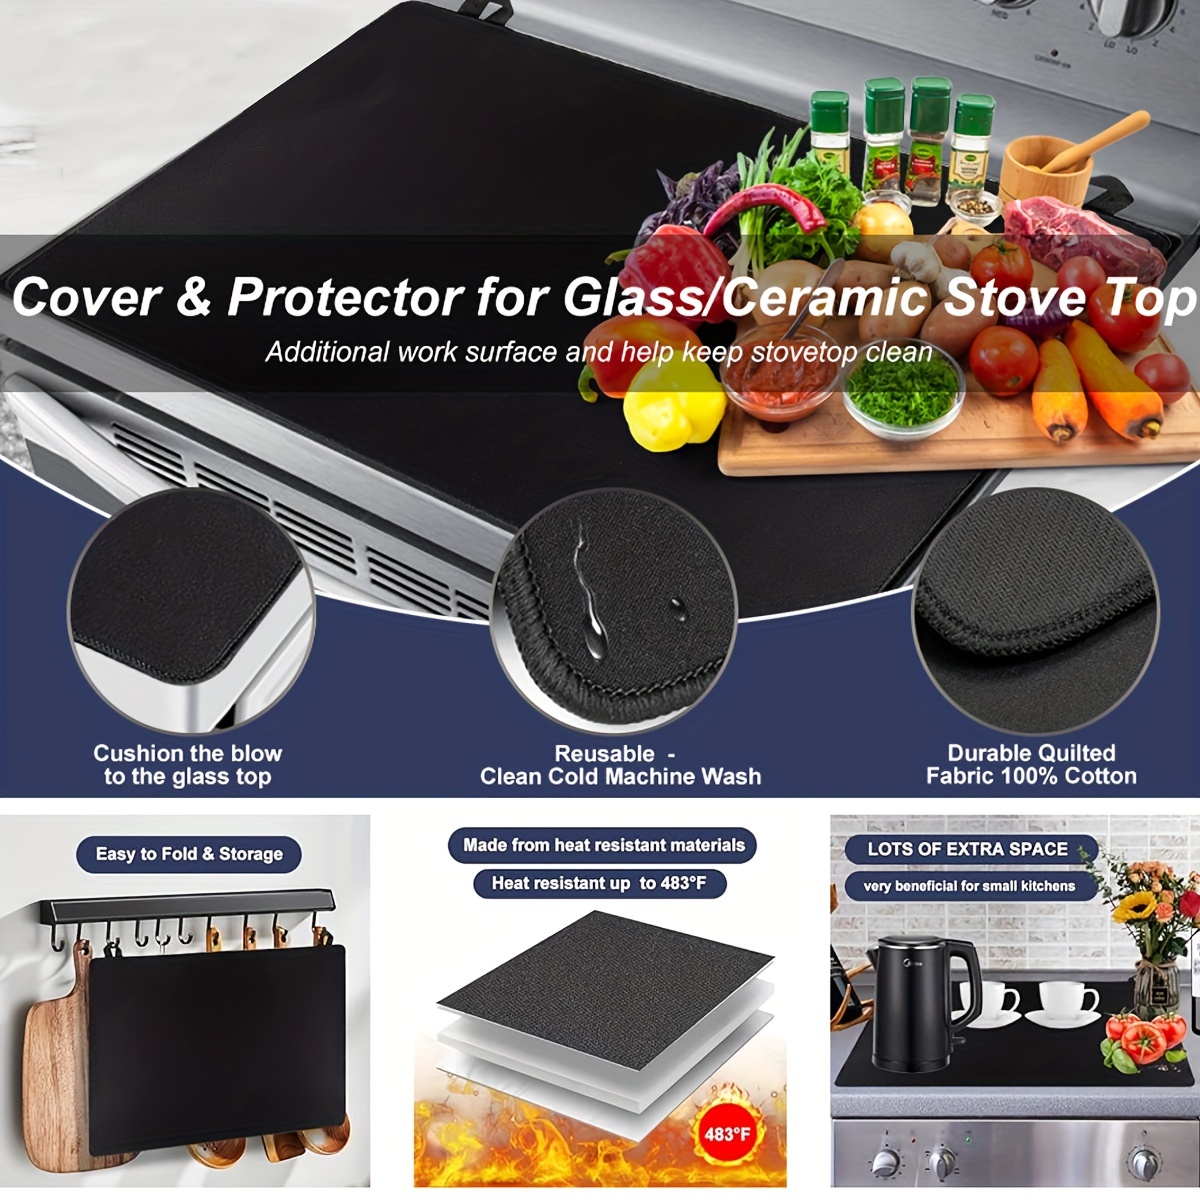 Stove Top Cover & Protector for Glass Ceramic Stove Washer Dryer Top  Quilted Top